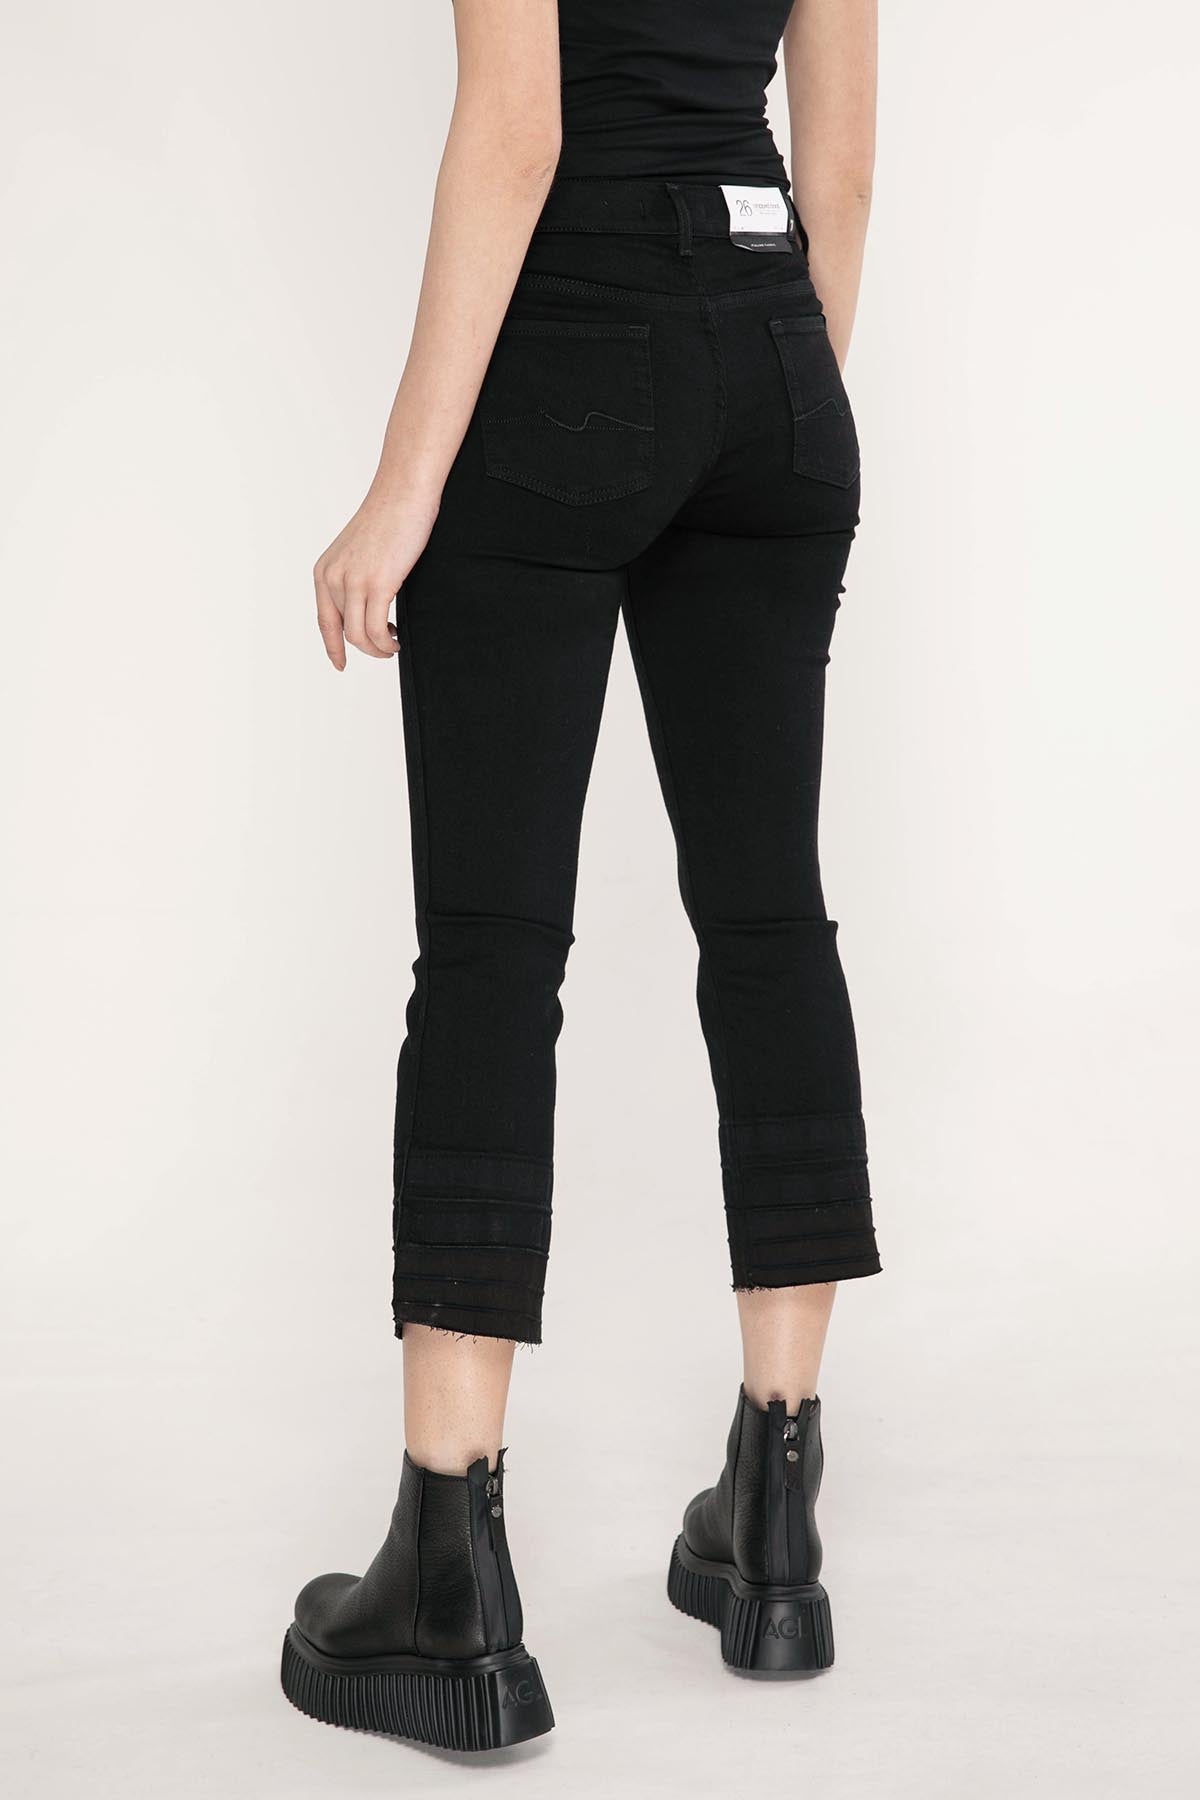 7 For All Mankind Cropped Boot Jeans-Libas Trendy Fashion Store